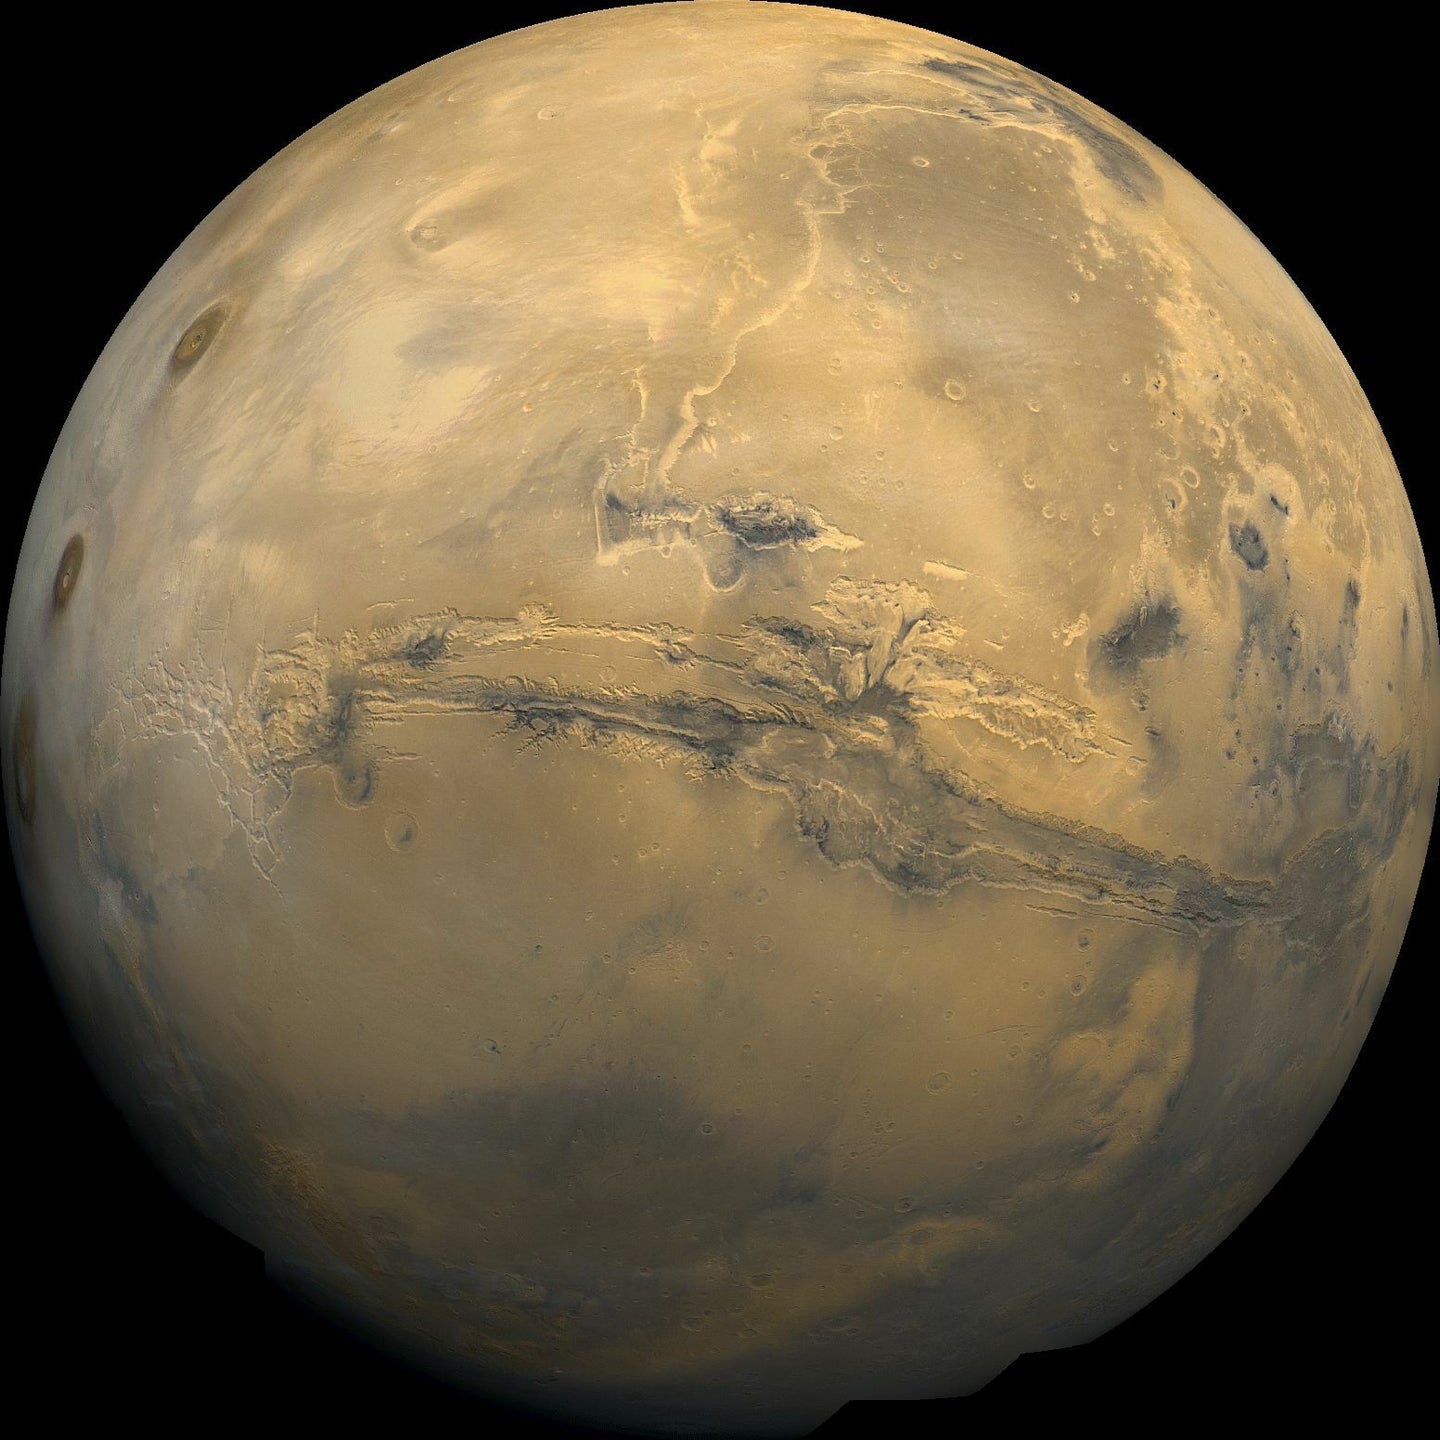 A global view of Mars.